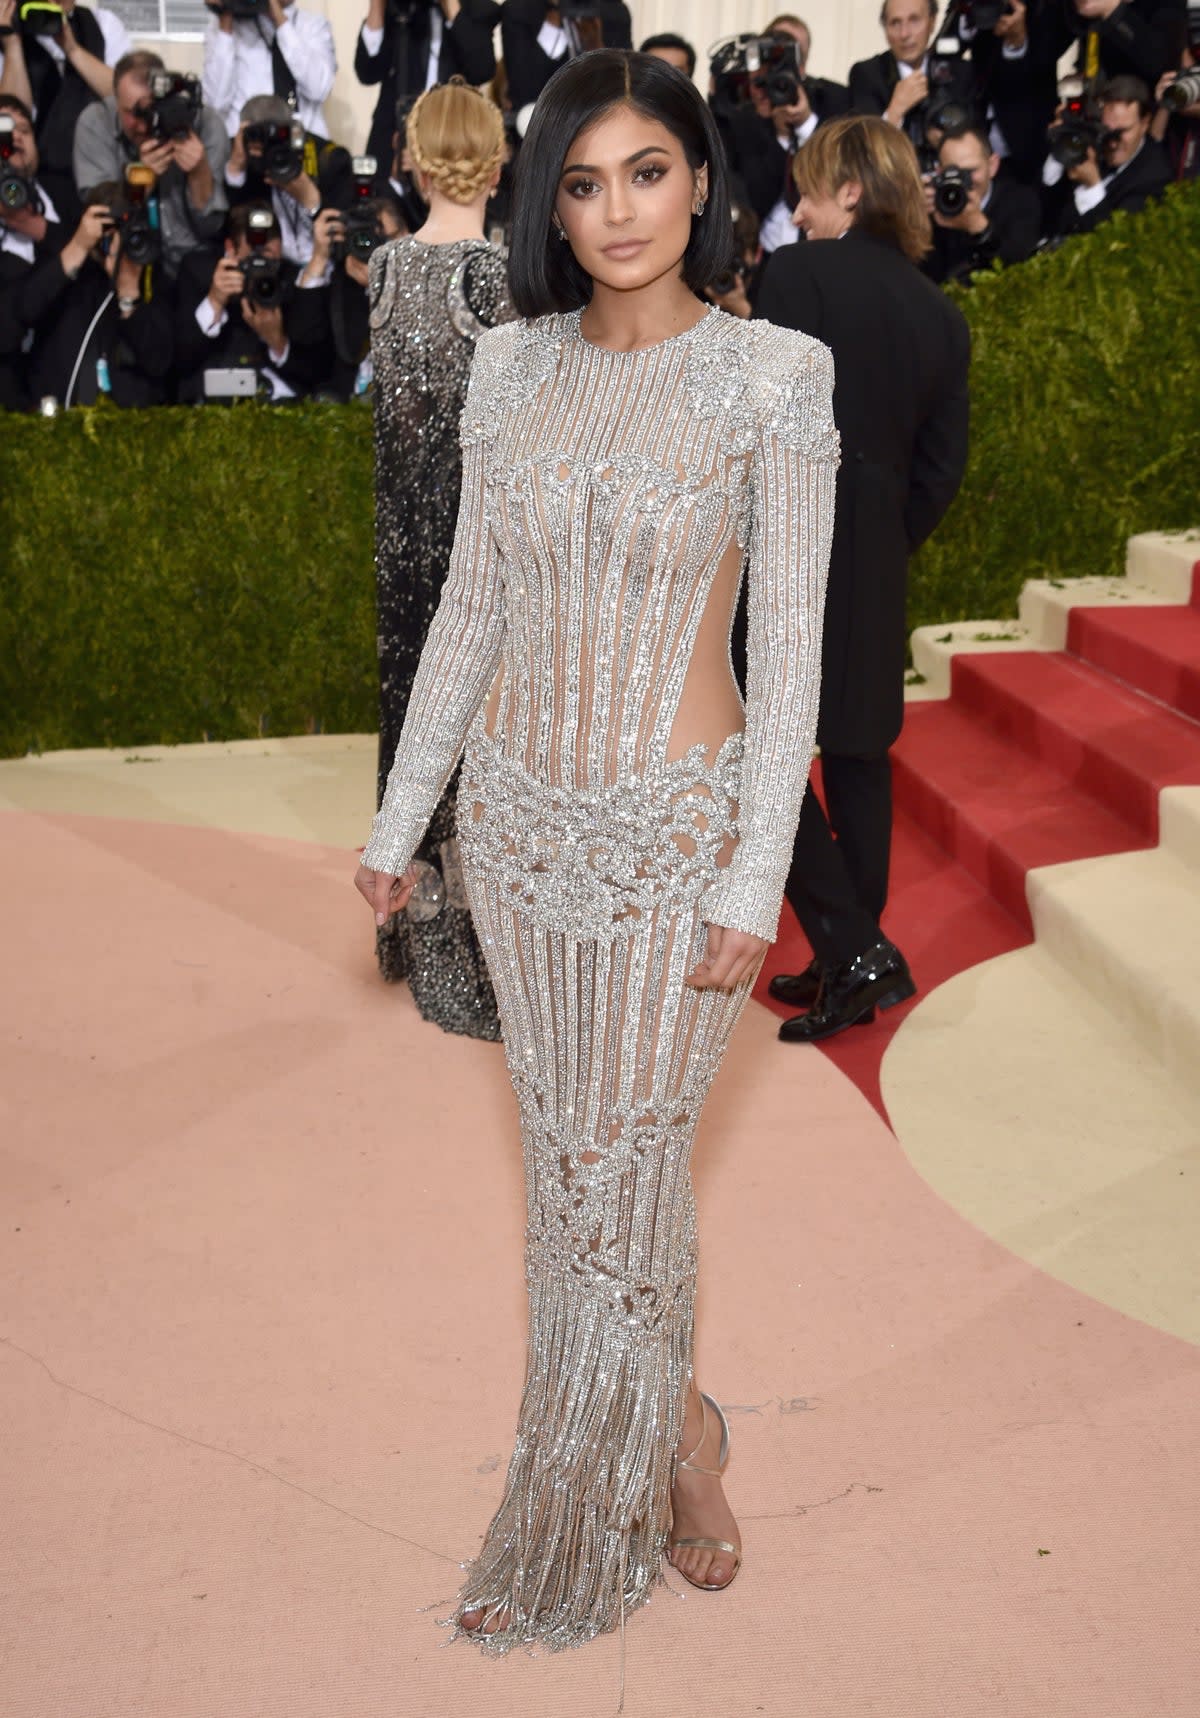 Kylie Jenner at the 2016 Met Gala (Getty Images)